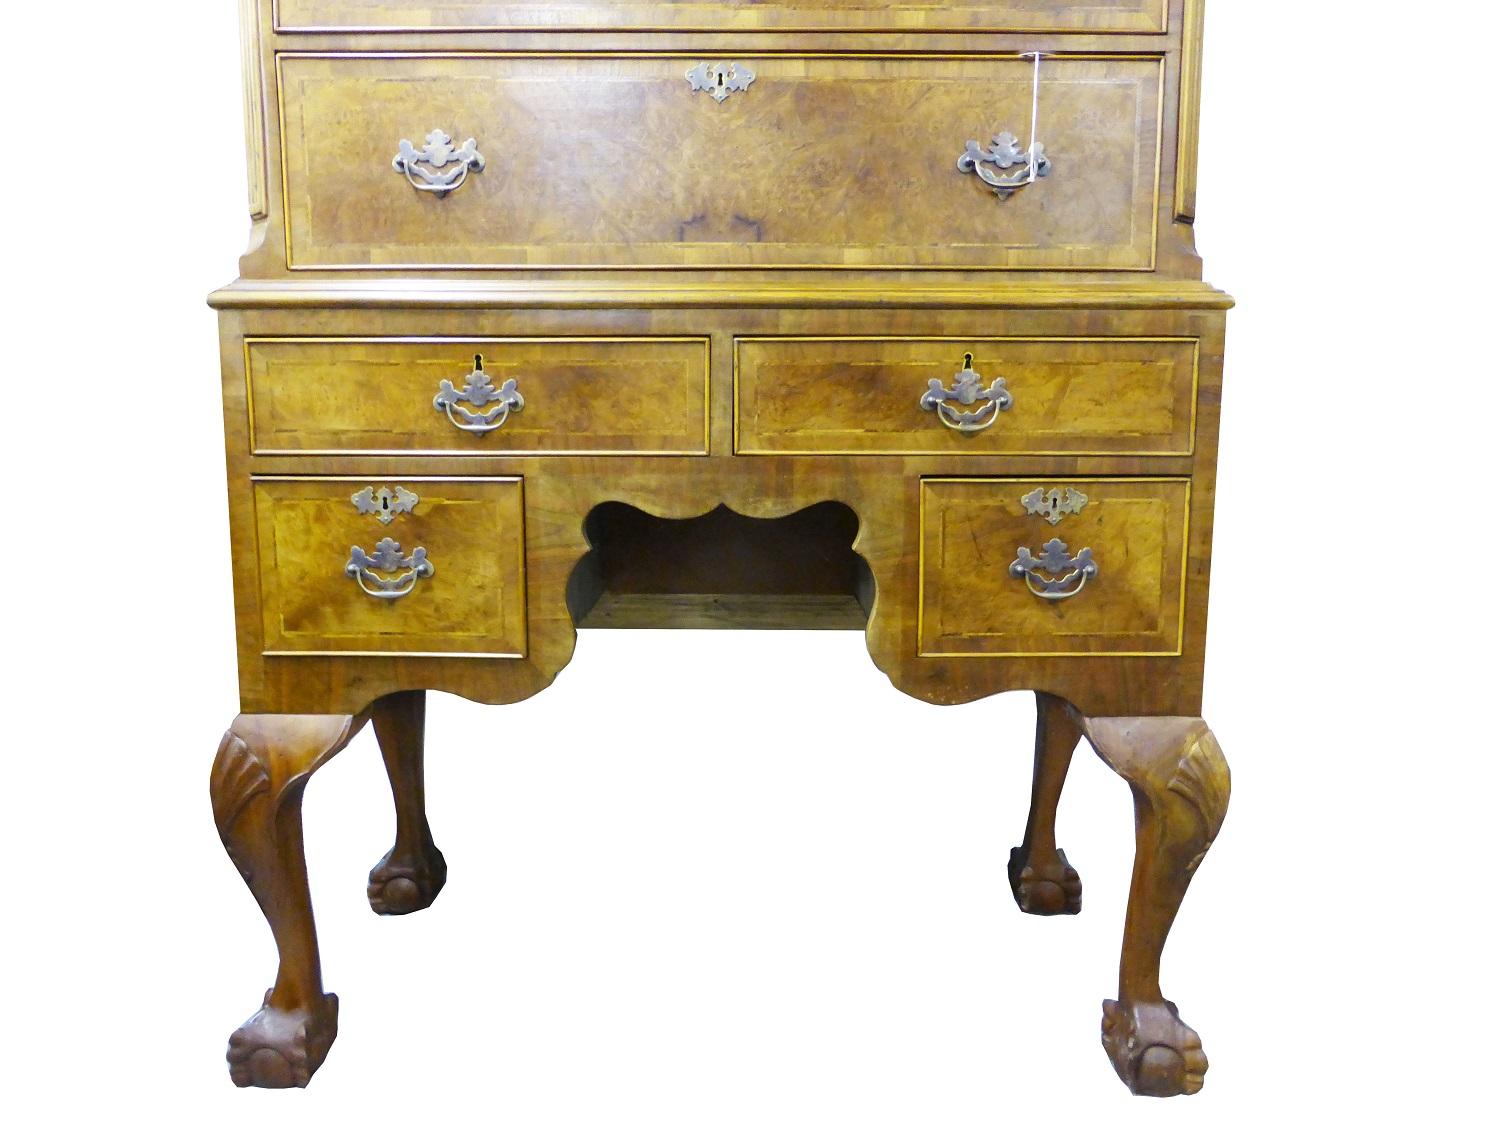 For sale is a good quality burr walnut chest on stand. The top of the chest has an arched pediment with a single drawer in the centre. Below this there are two short drawers over three long. The chest fits onto the base, comprising of a single long